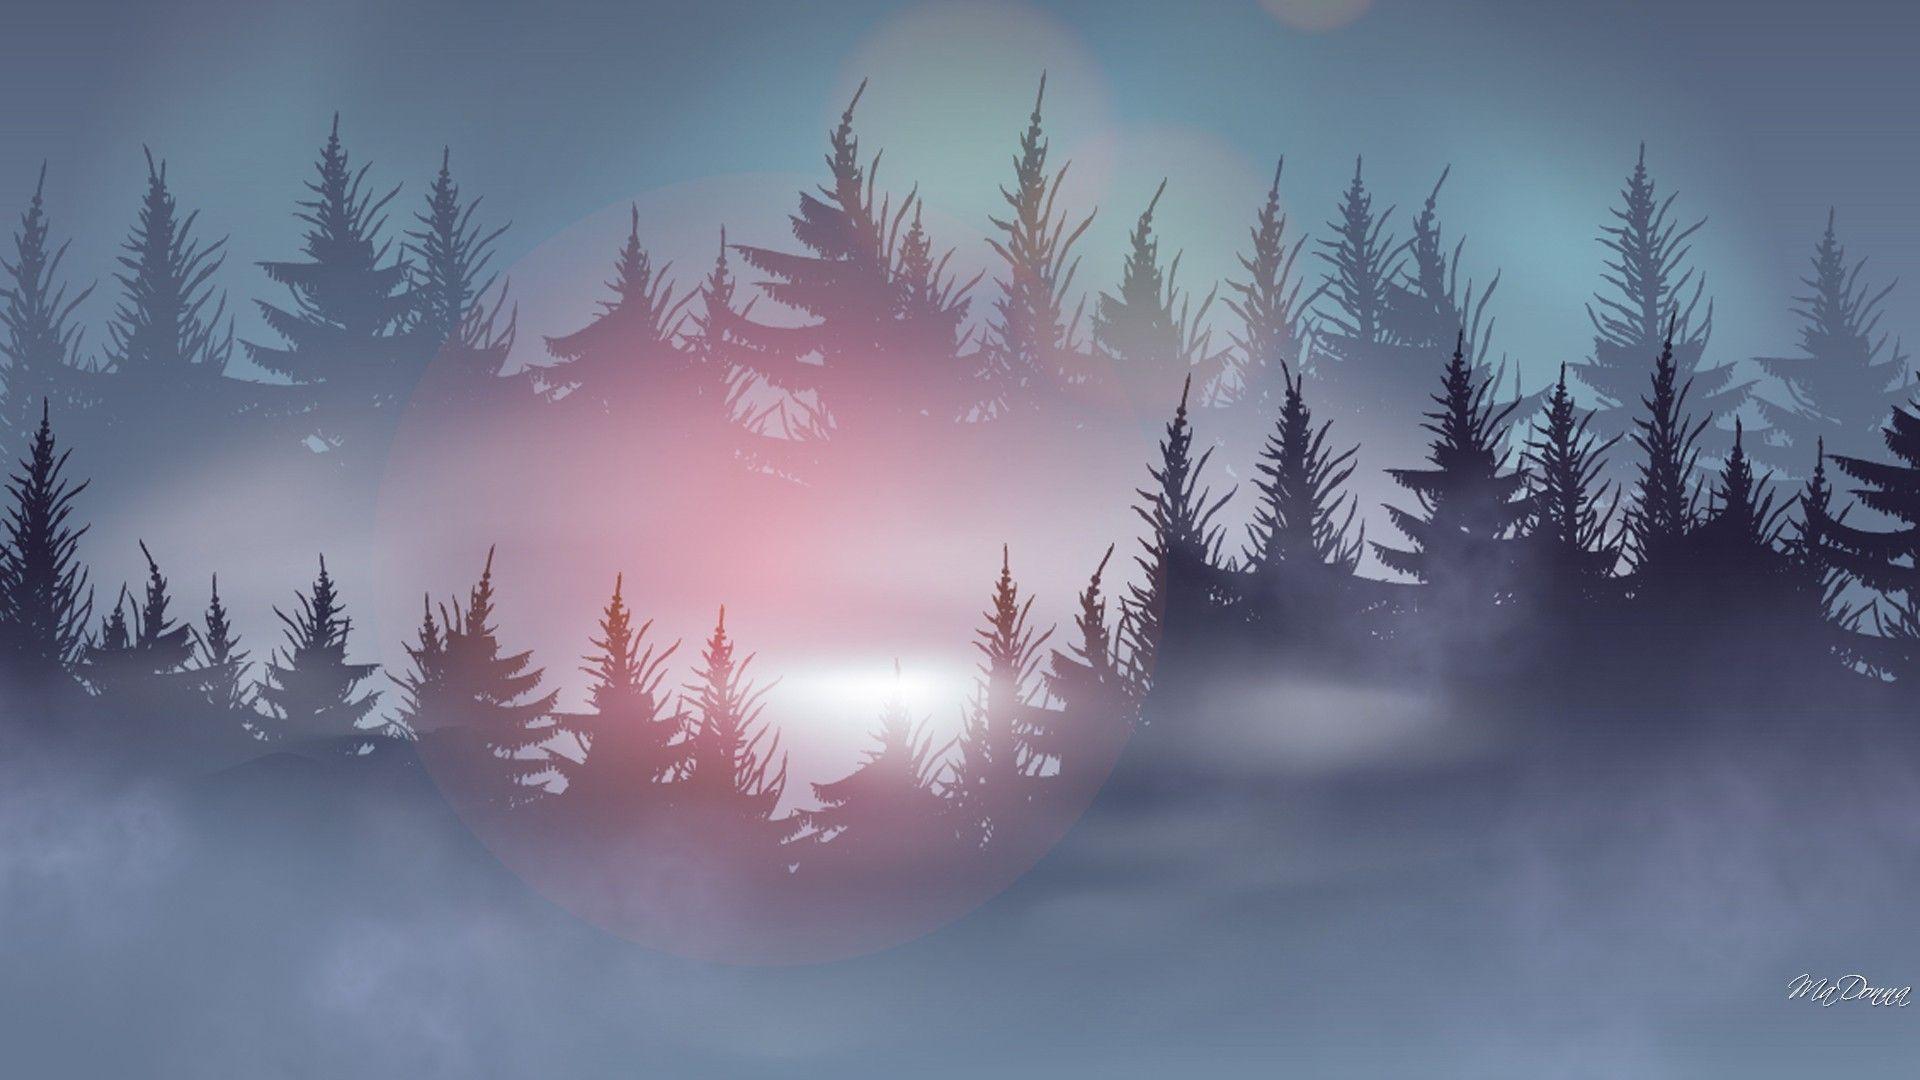 Forests: Tranquil Mountains Sky Trees Fog Misty Forest Twilight